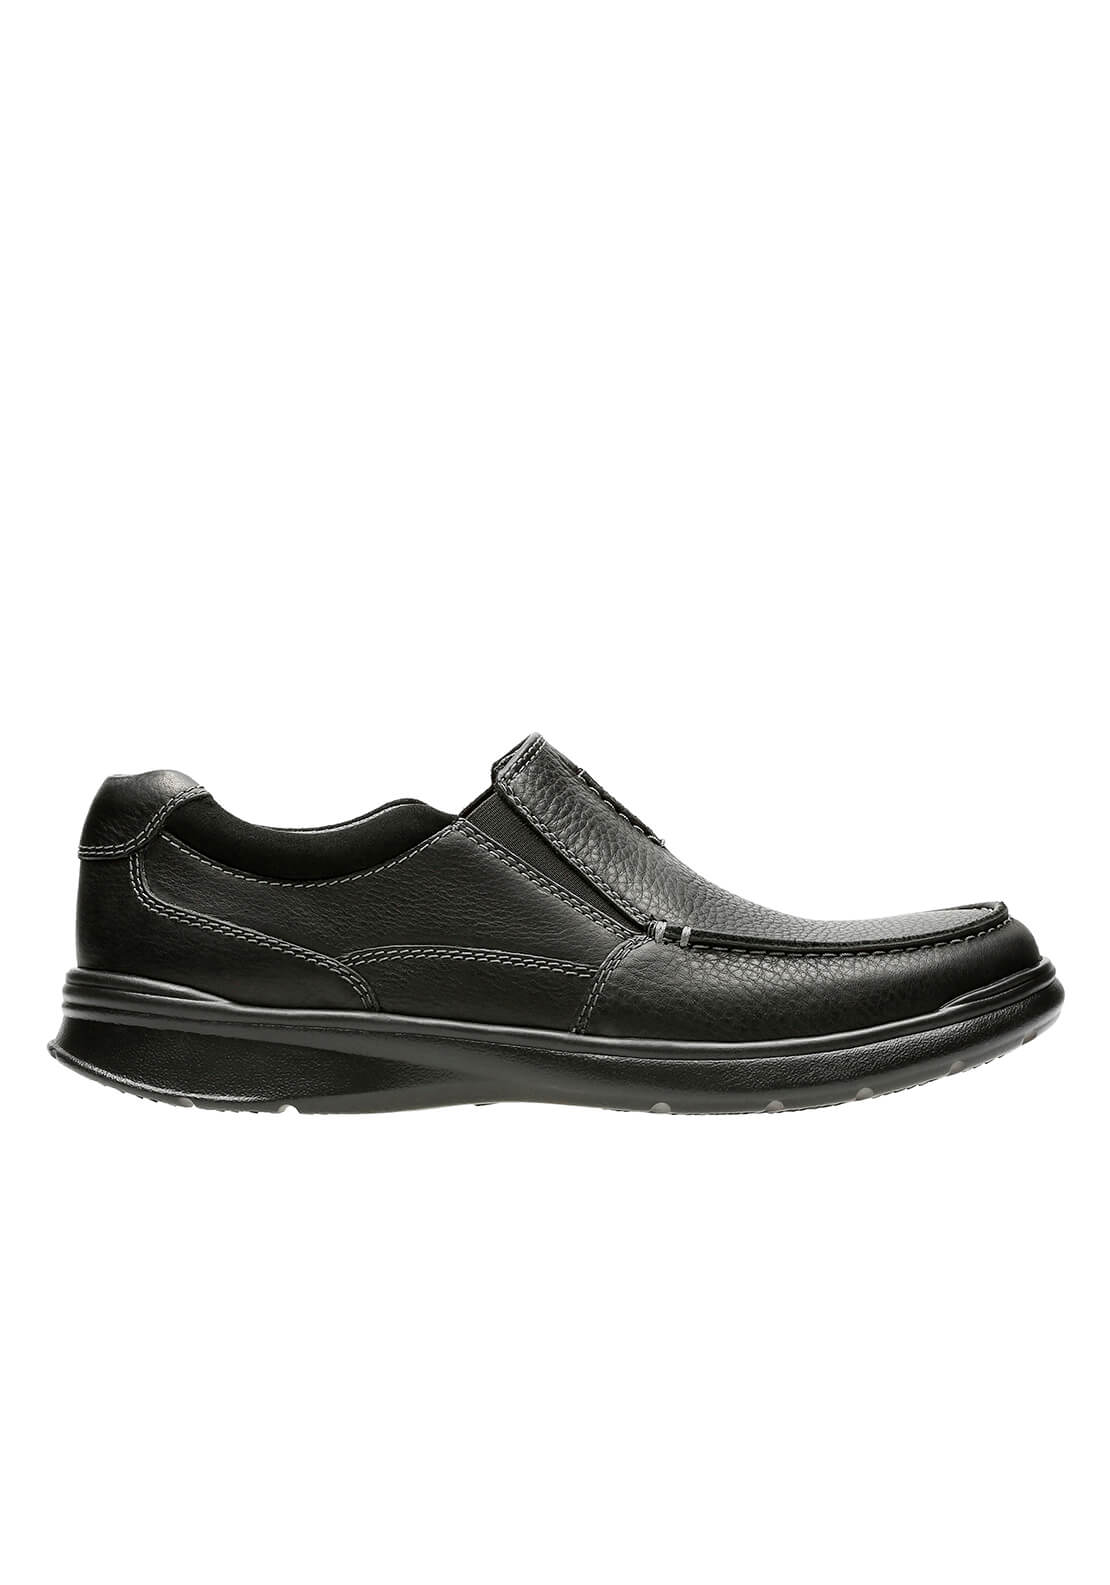 Clarks Cotrell Free Casual Shoe - Black 3 Shaws Department Stores